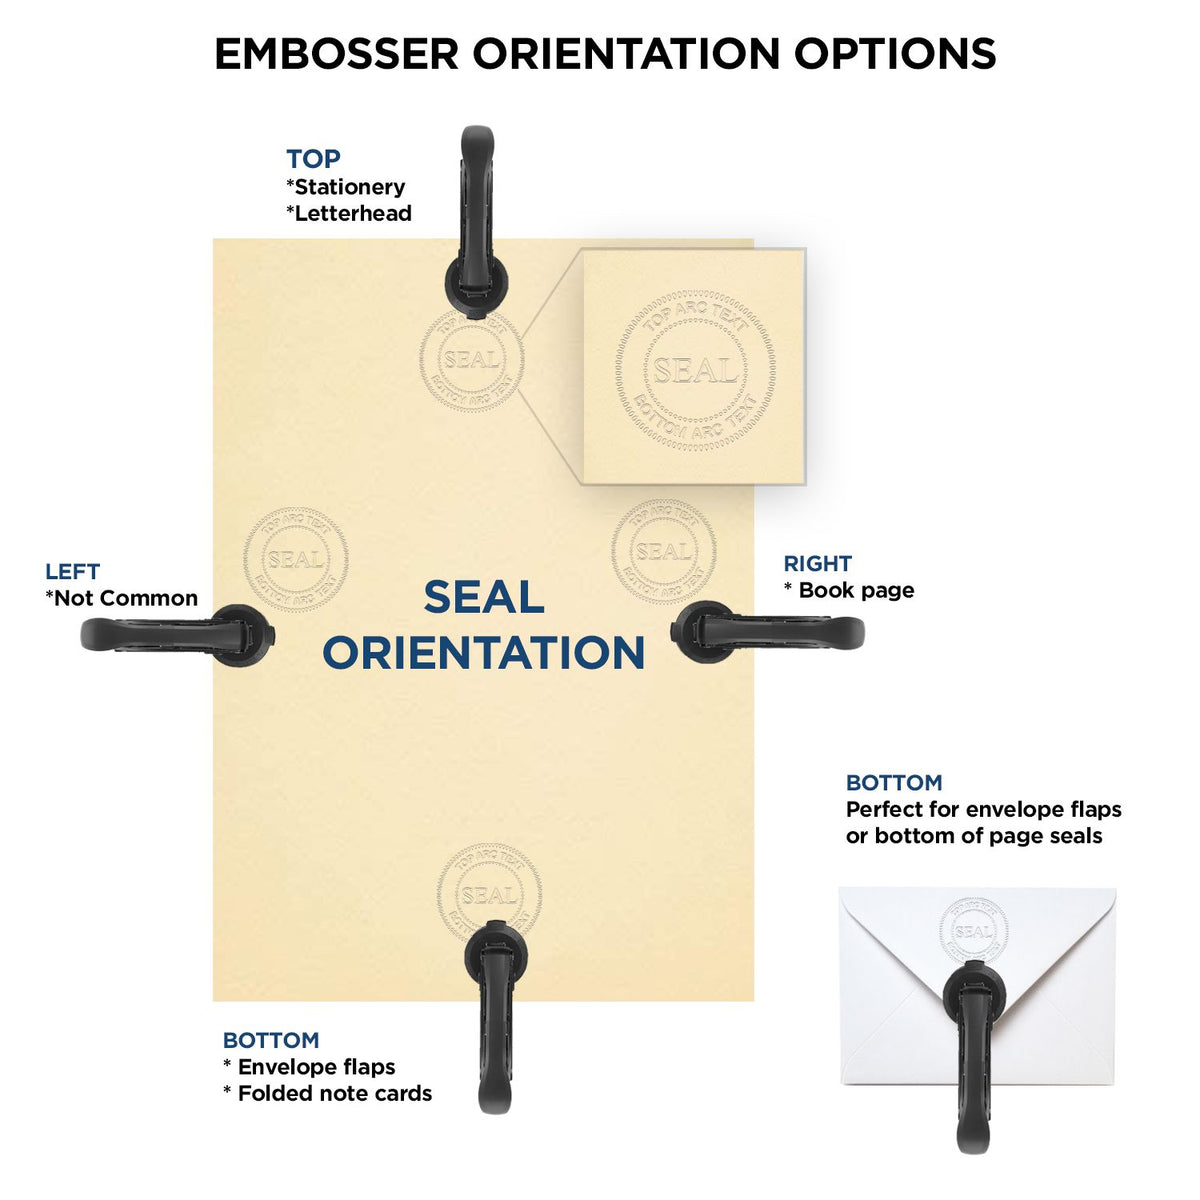 An infographic for the State of Illinois Extended Long Reach Engineer Seal showing embosser orientation, this is showing examples of a top, bottom, right and left insert.